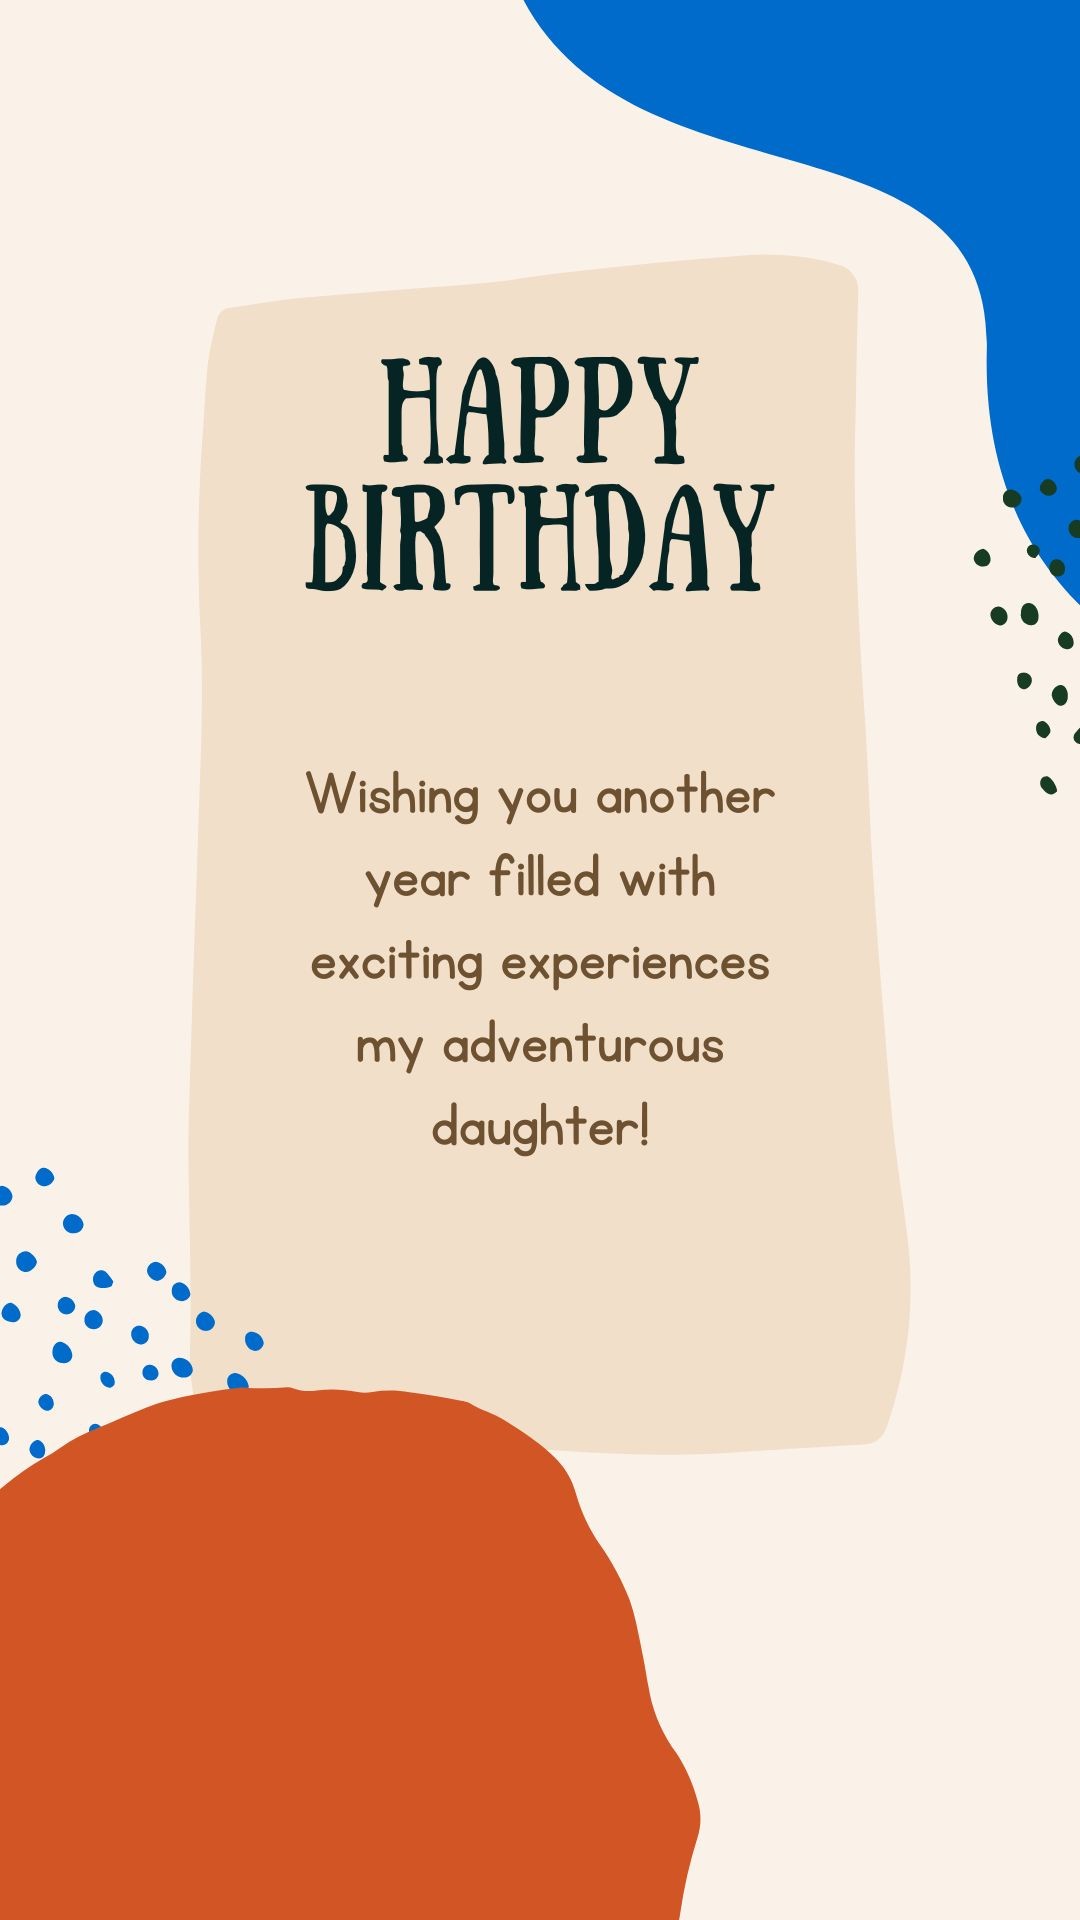 Birthday images for daughter colorful abstract